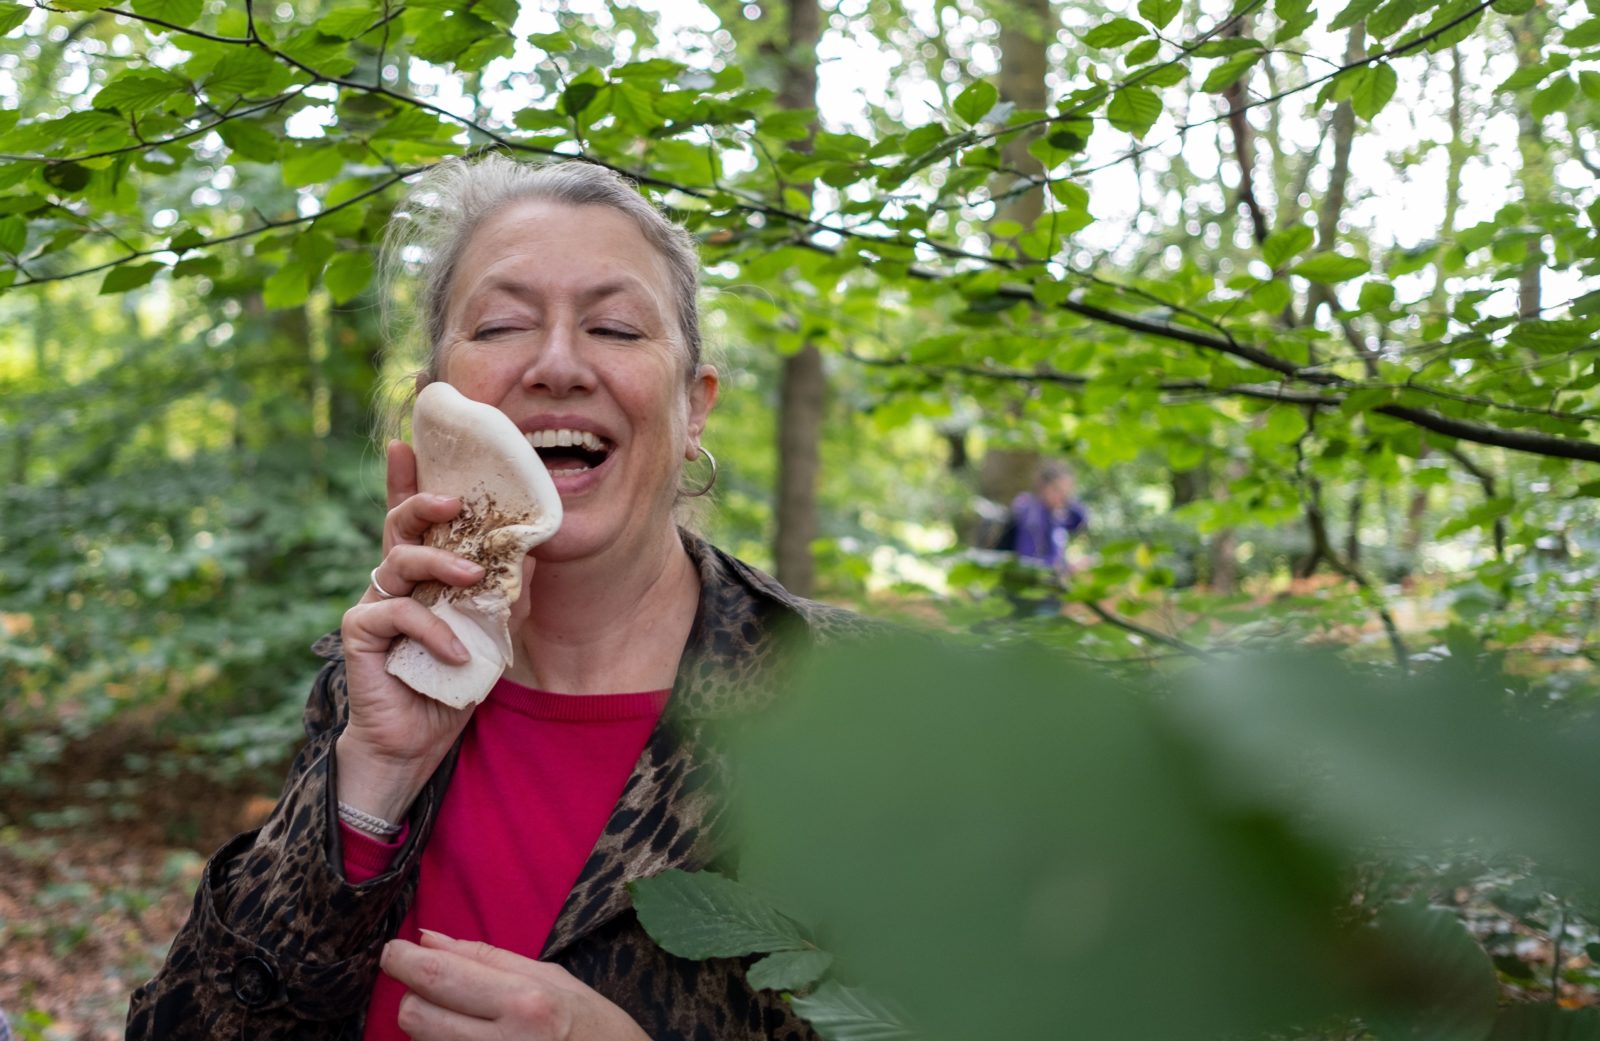 Jane Lawson is photographed holding a large flat mushroom up to her cheek in Stanley Bank Wood, she is laughing.